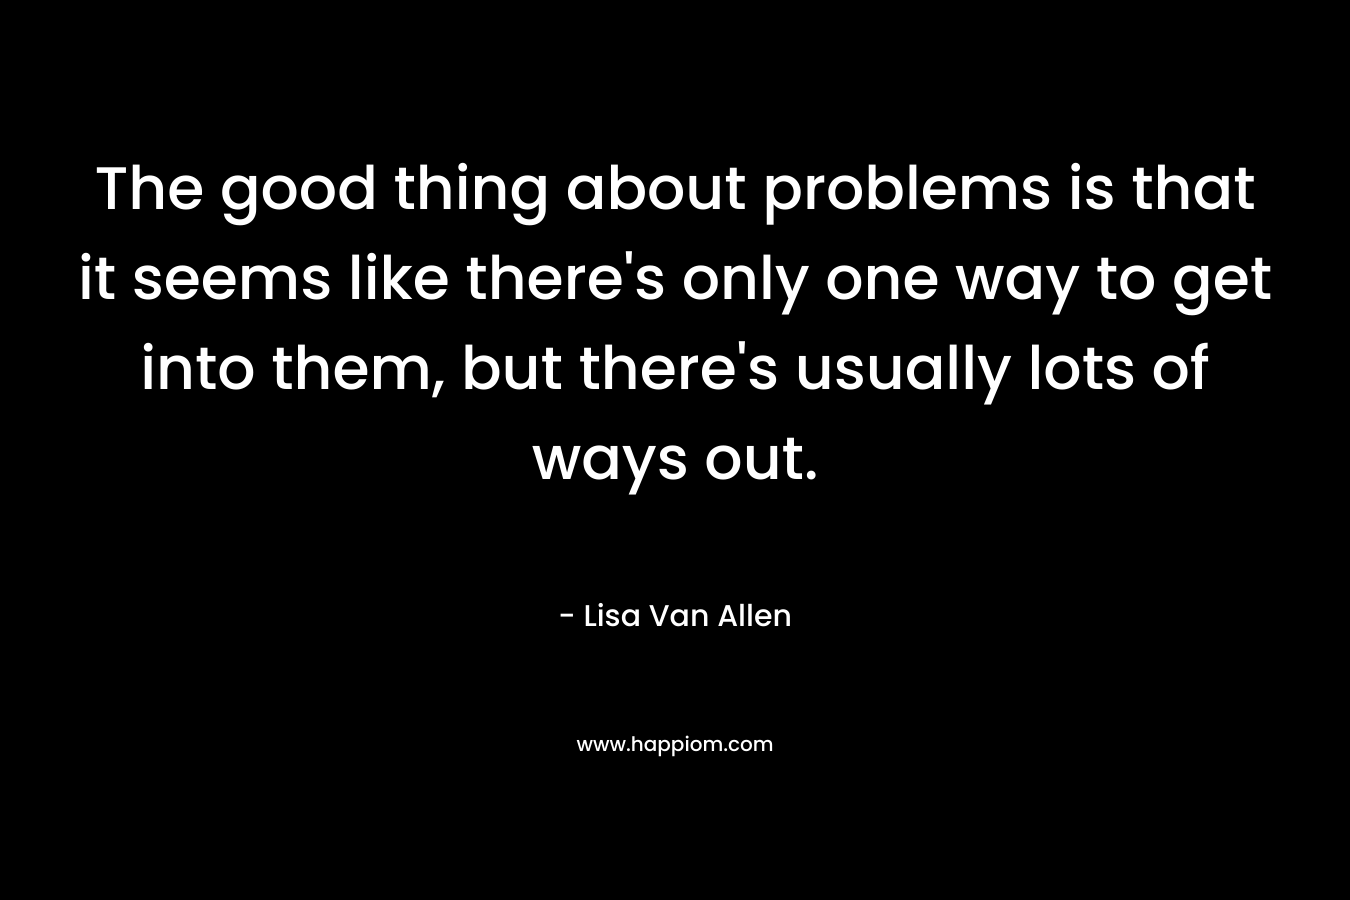 The good thing about problems is that it seems like there’s only one way to get into them, but there’s usually lots of ways out. – Lisa Van Allen